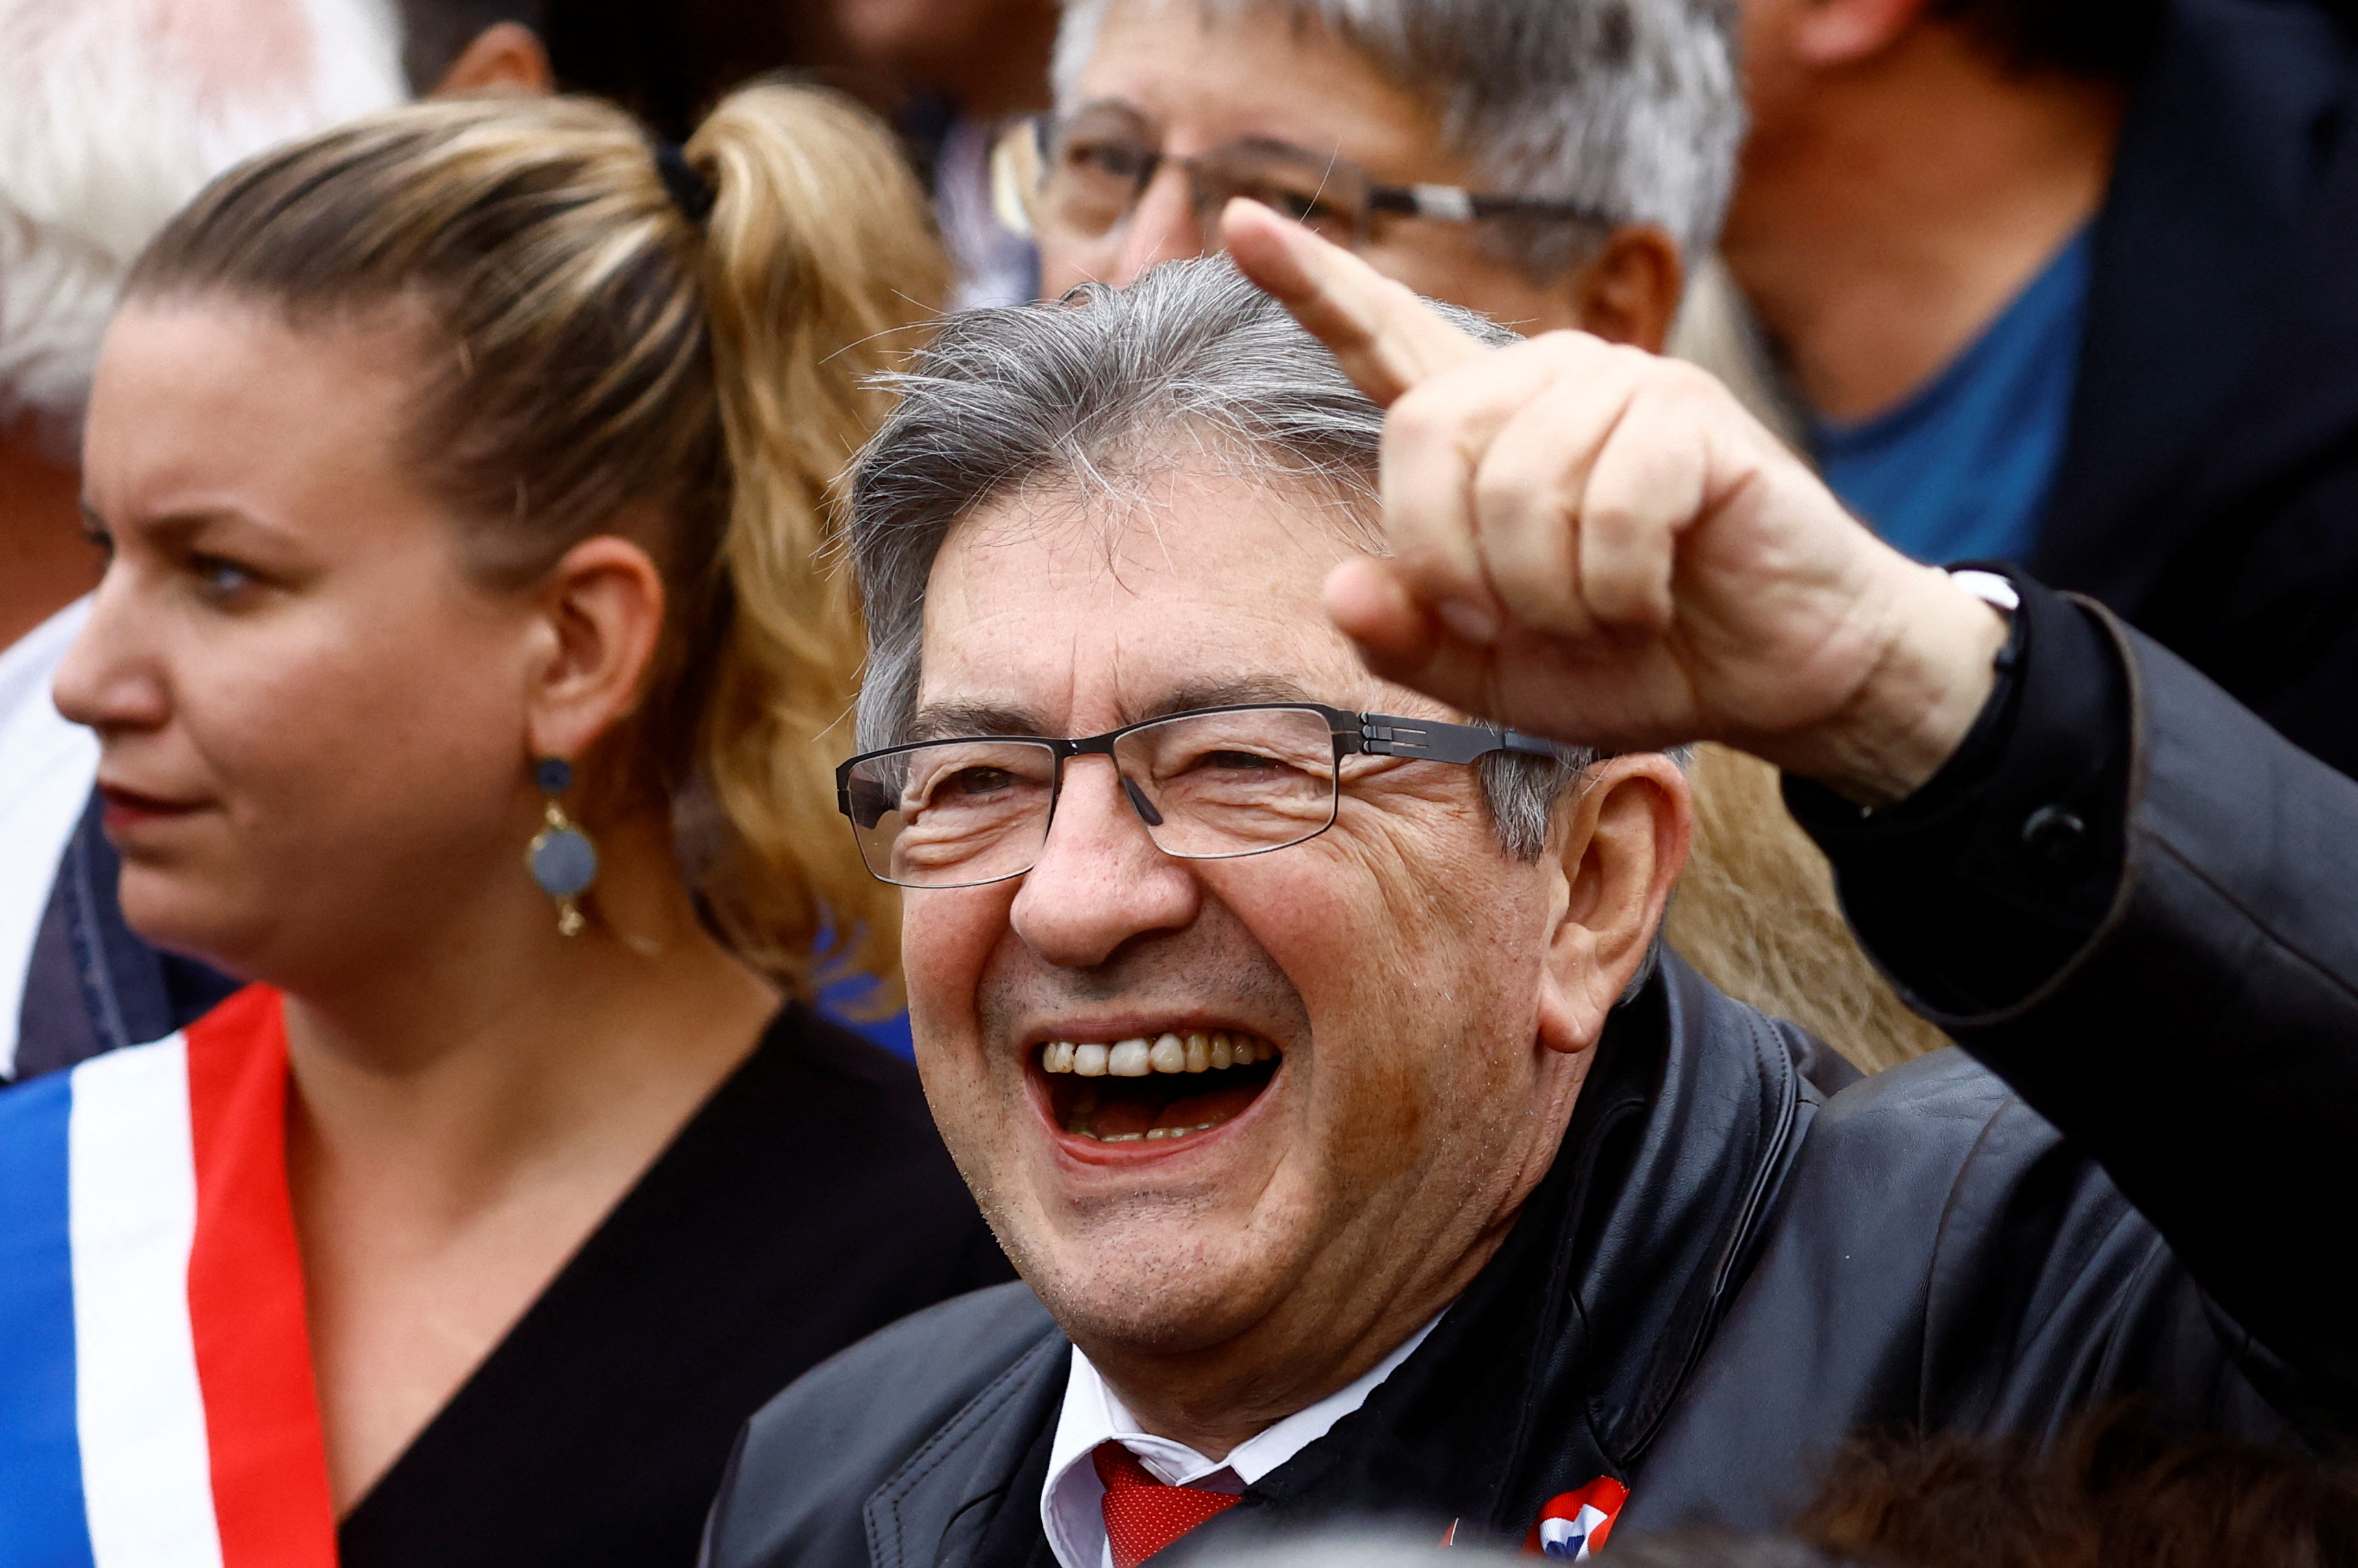 Jean-Luc Melenchon, leader of the French far-left opposition party La France Insoumise (Insoumise France), and leader of the New Popular Ecological and Social Union (NUPES), in Paris, France, October 16, 2022. REUTERS /Stephane Mahe/Archive